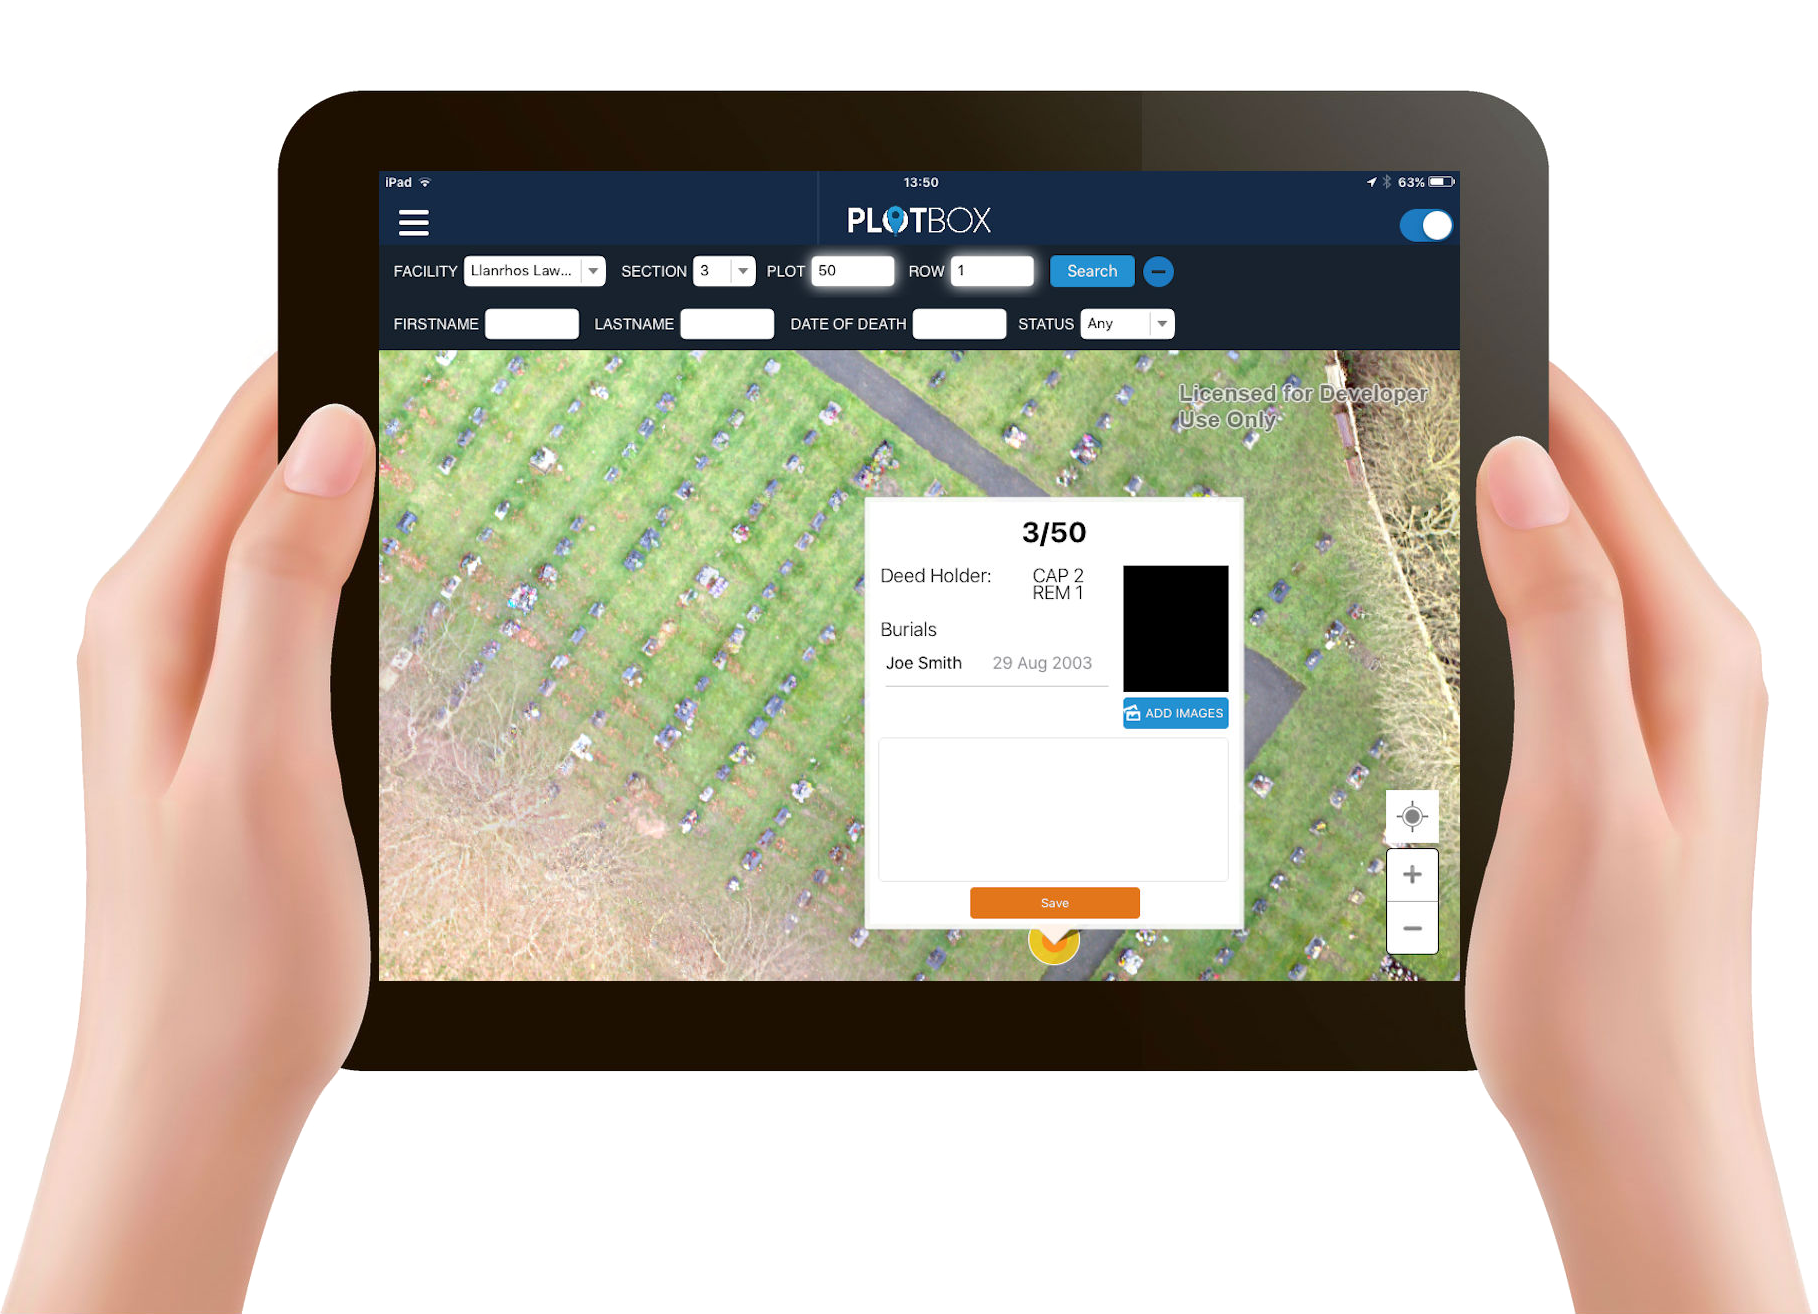 Plotbox Software - Cloud-based for 24/7 access, the software is also supported by the PlotBox App for native deployment on iPad tablet devices